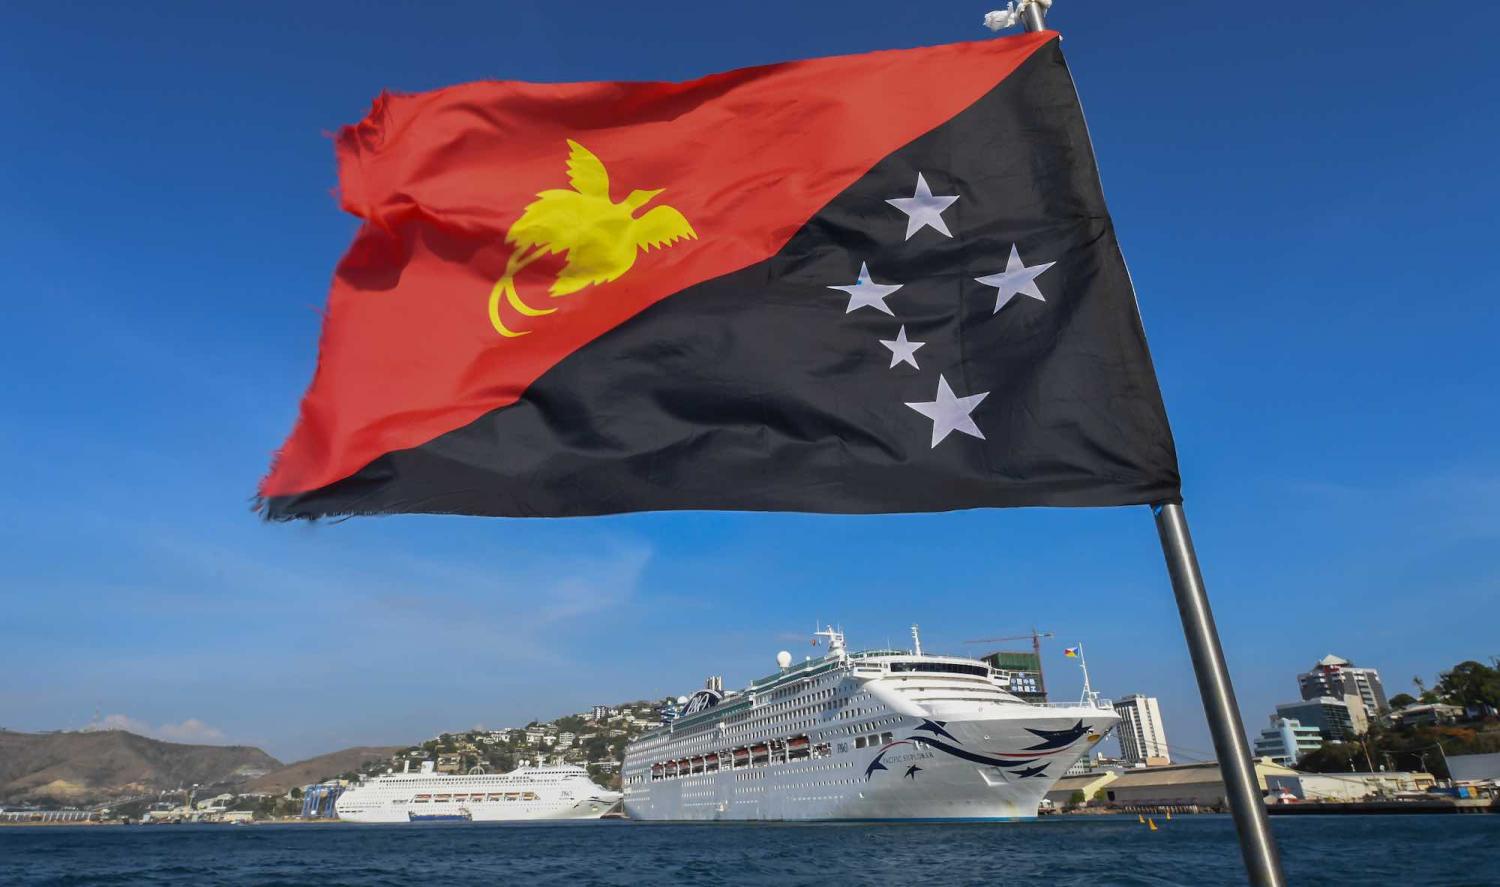 Cruise ships for accommodation during the APEC summit in Port Moresby (Photo: James D. Morgan/Getty Images)